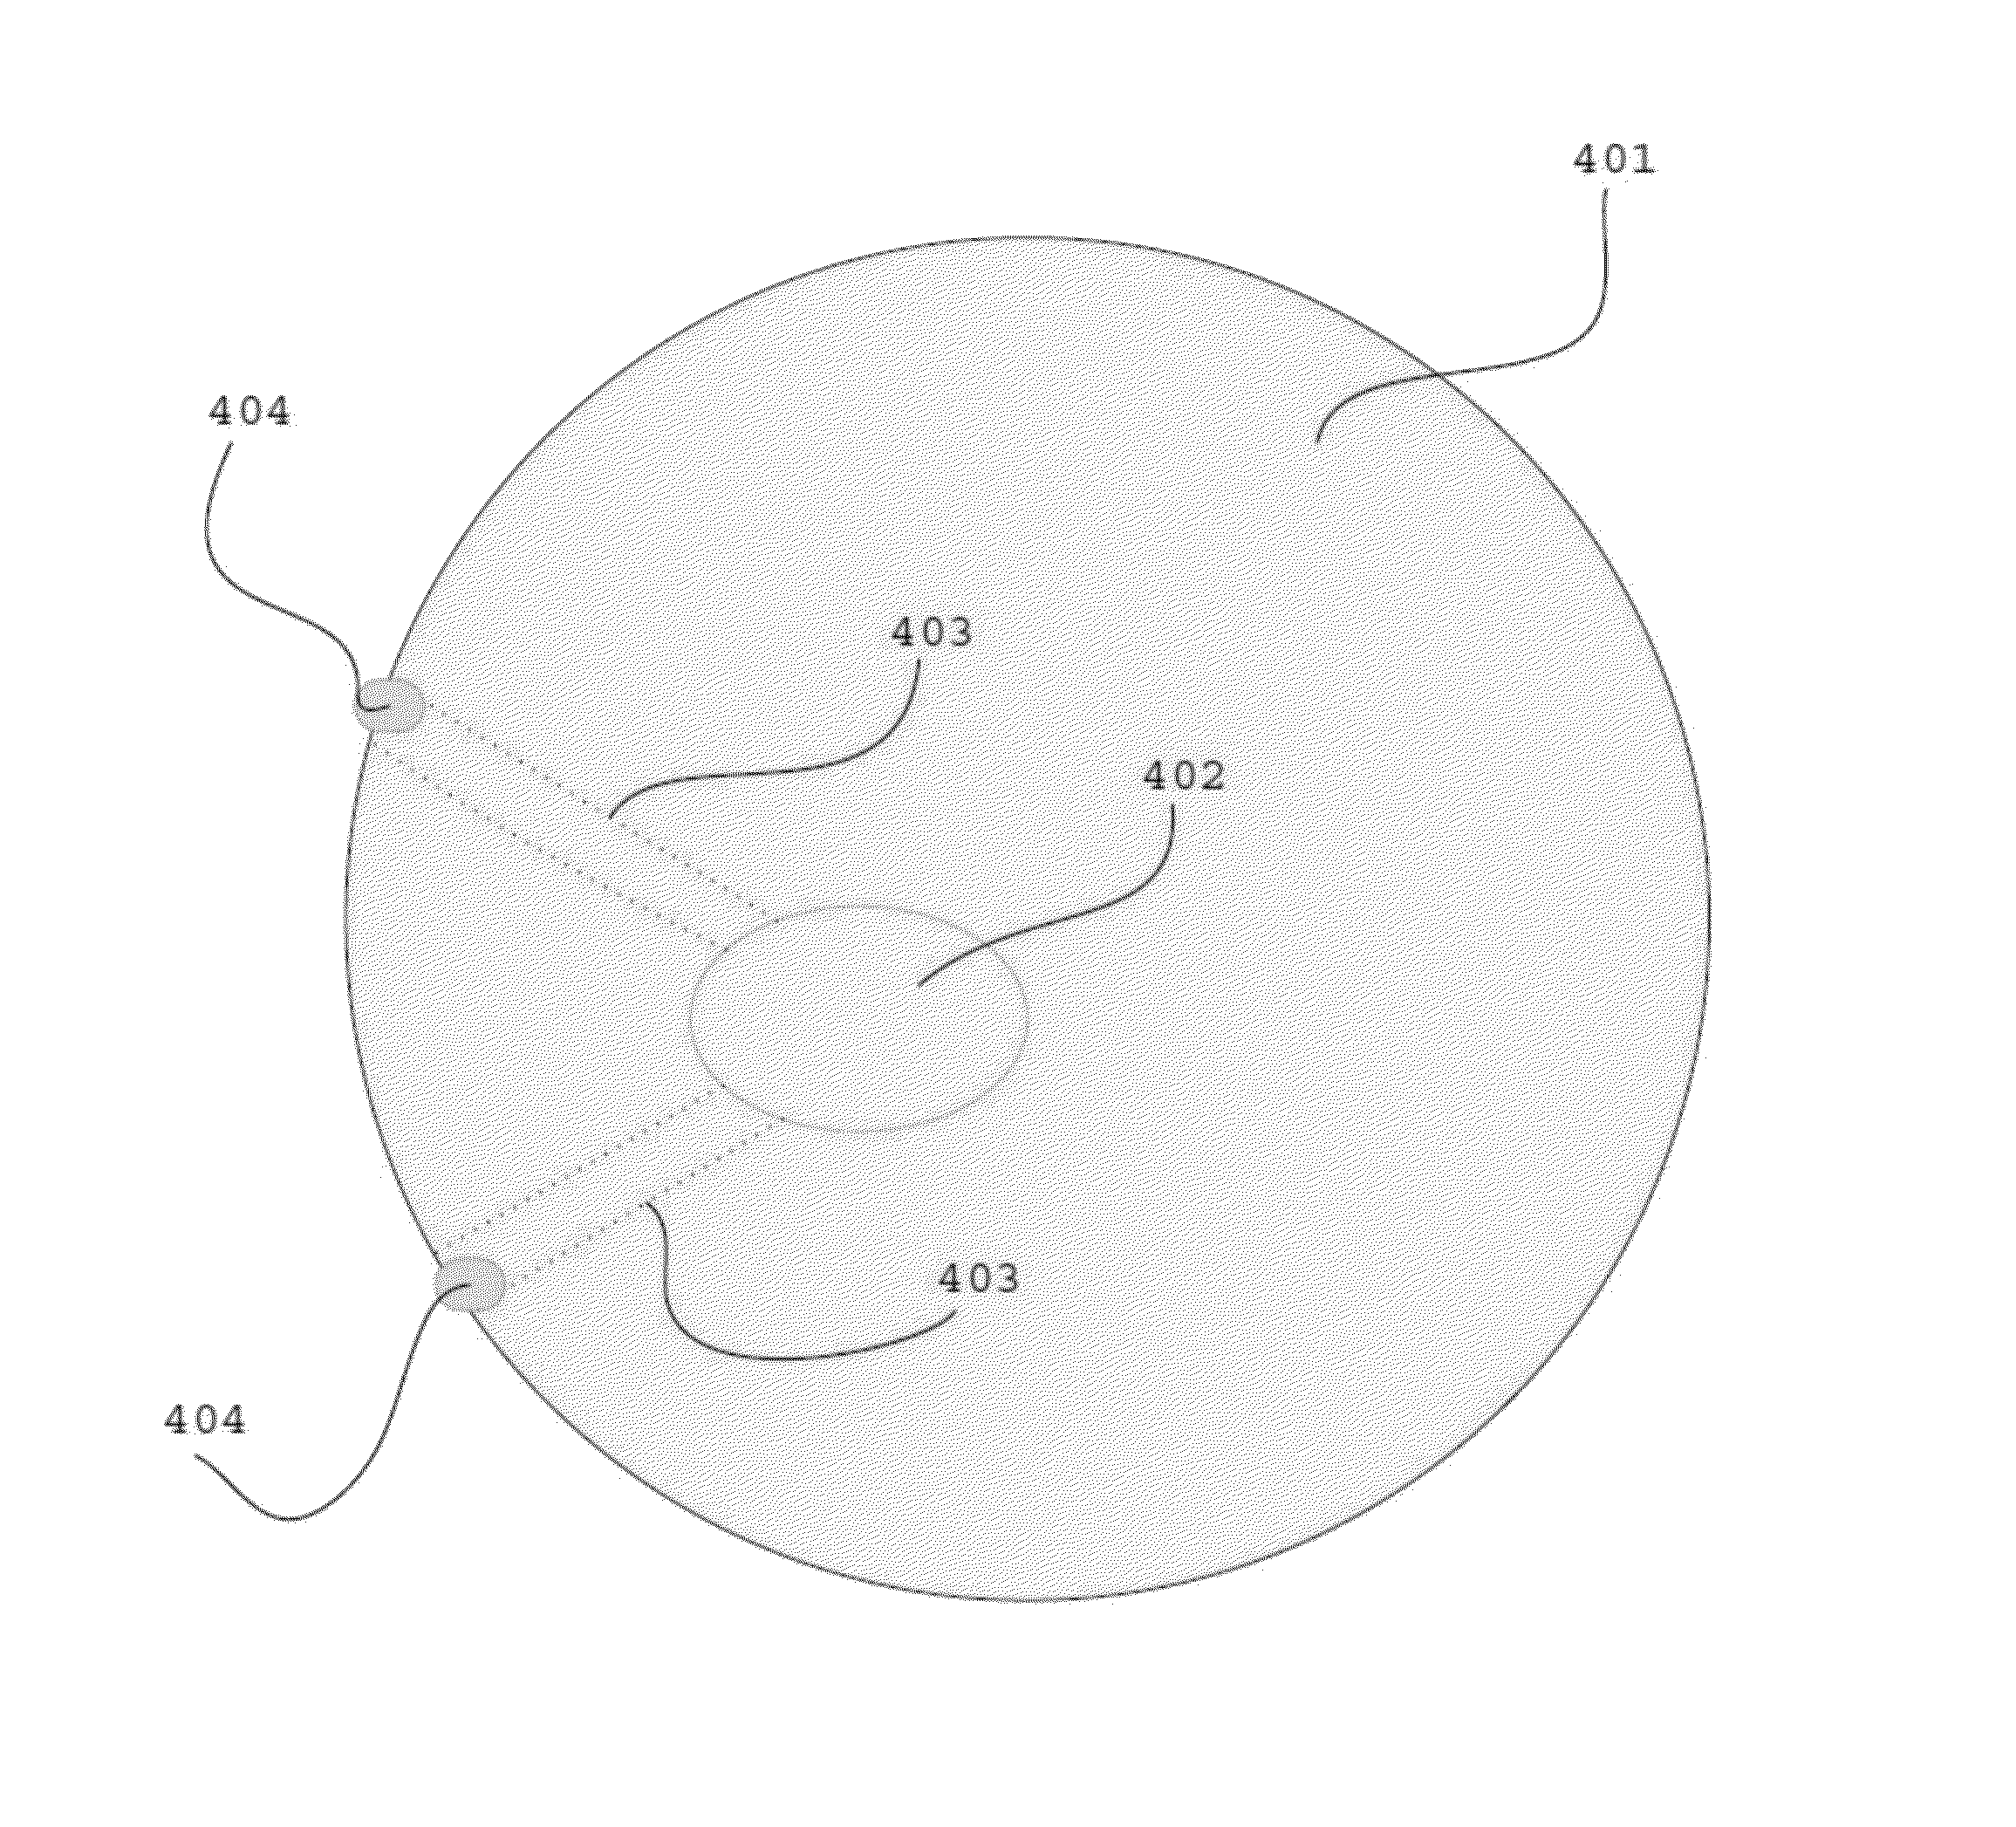 Transparent conductive ink compositions and the use thereof in electro-active optical systems